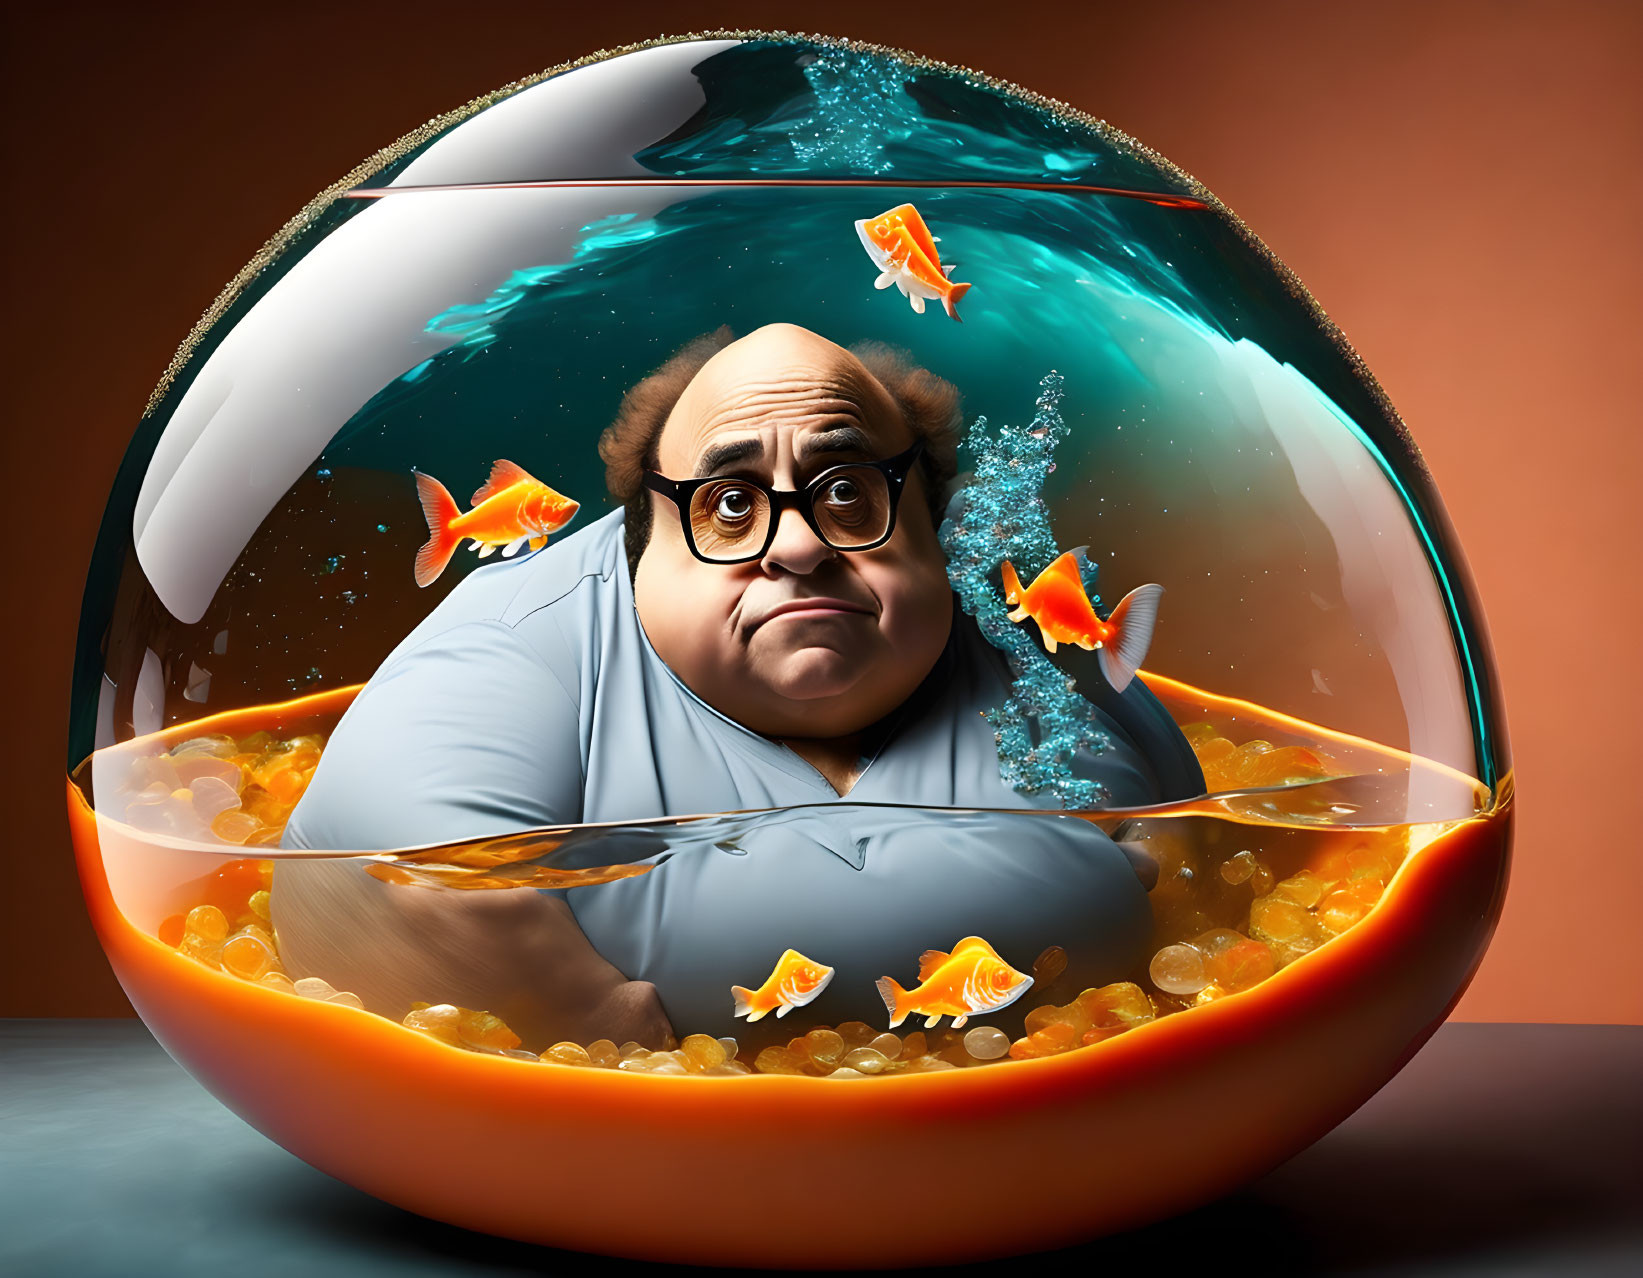 Frank in a fish bowl